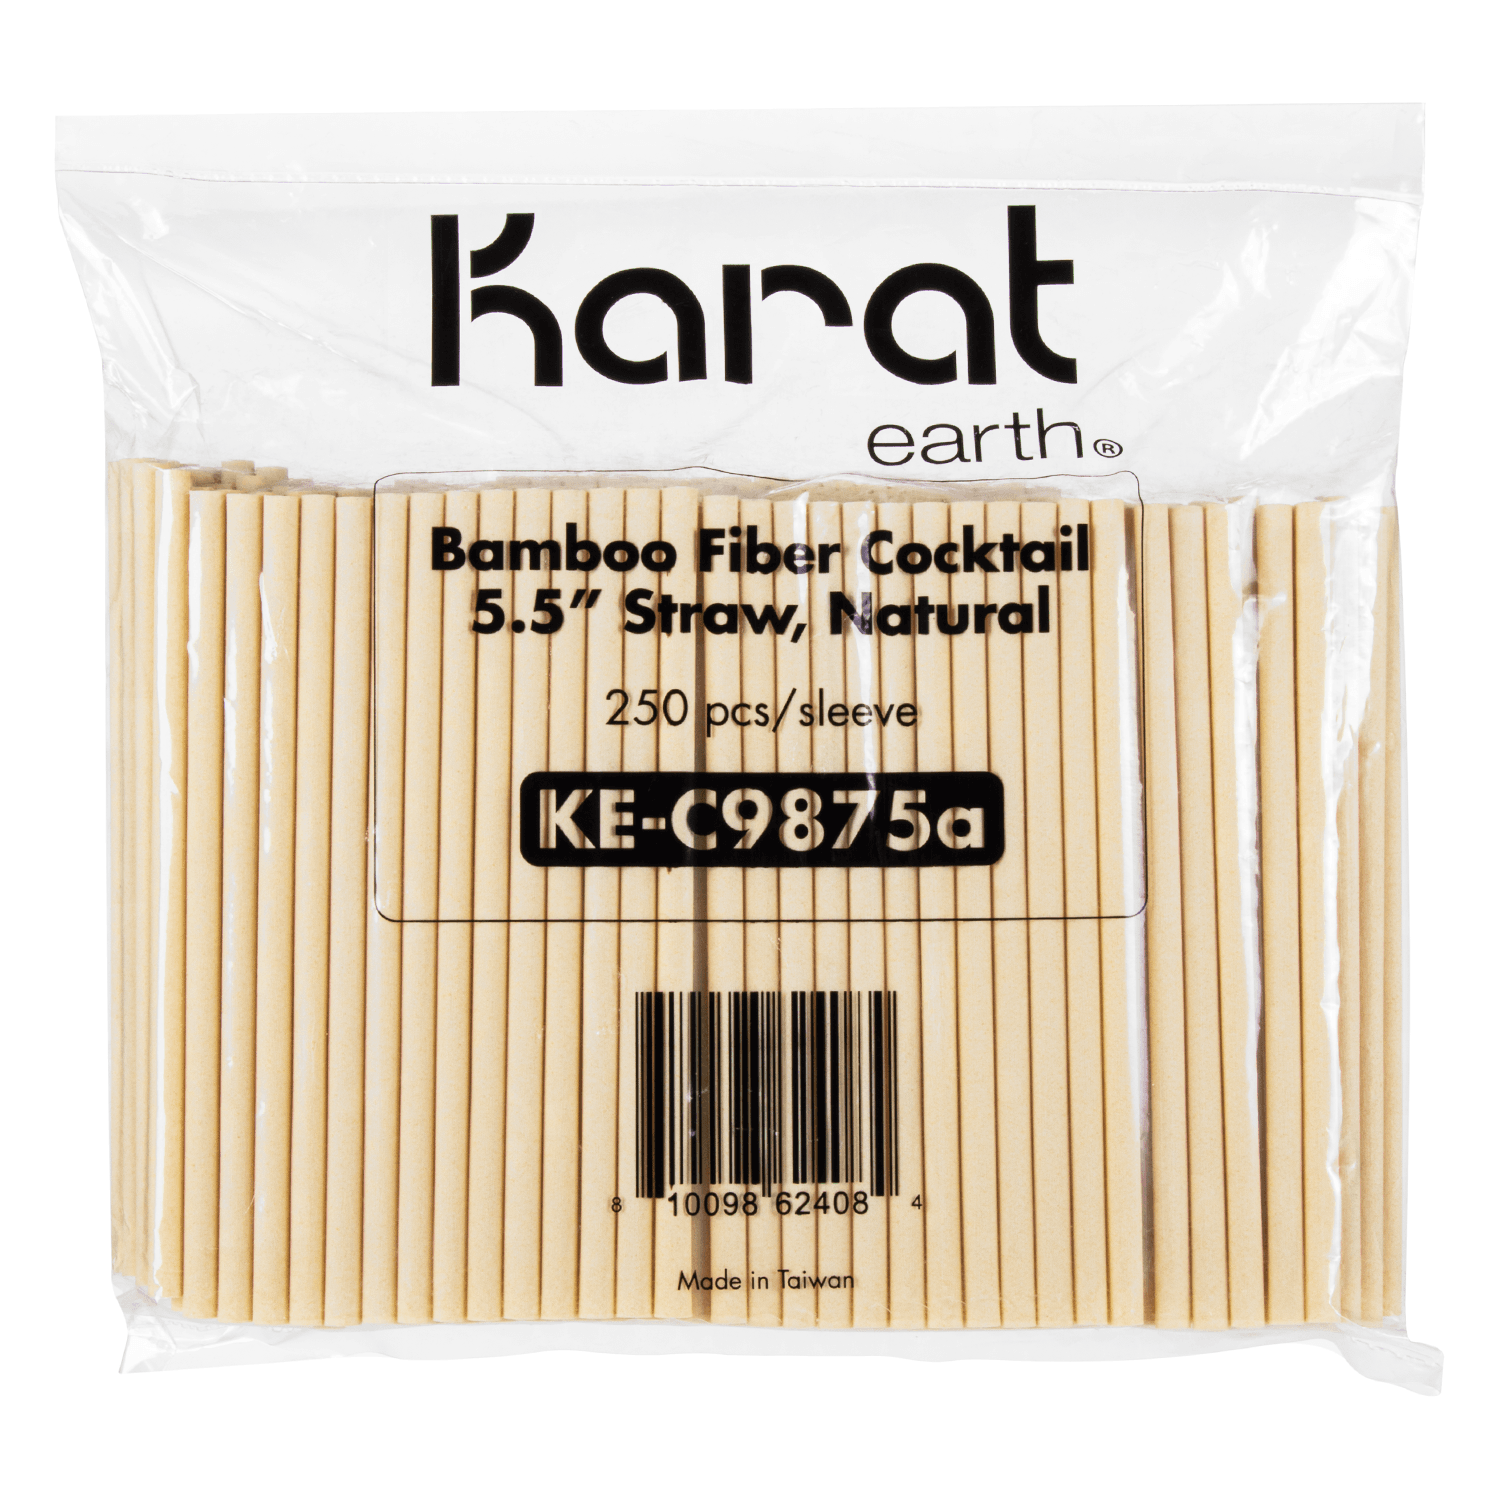 Karat Earth Bamboo Fiber Cocktail 5.5'' Straw in package